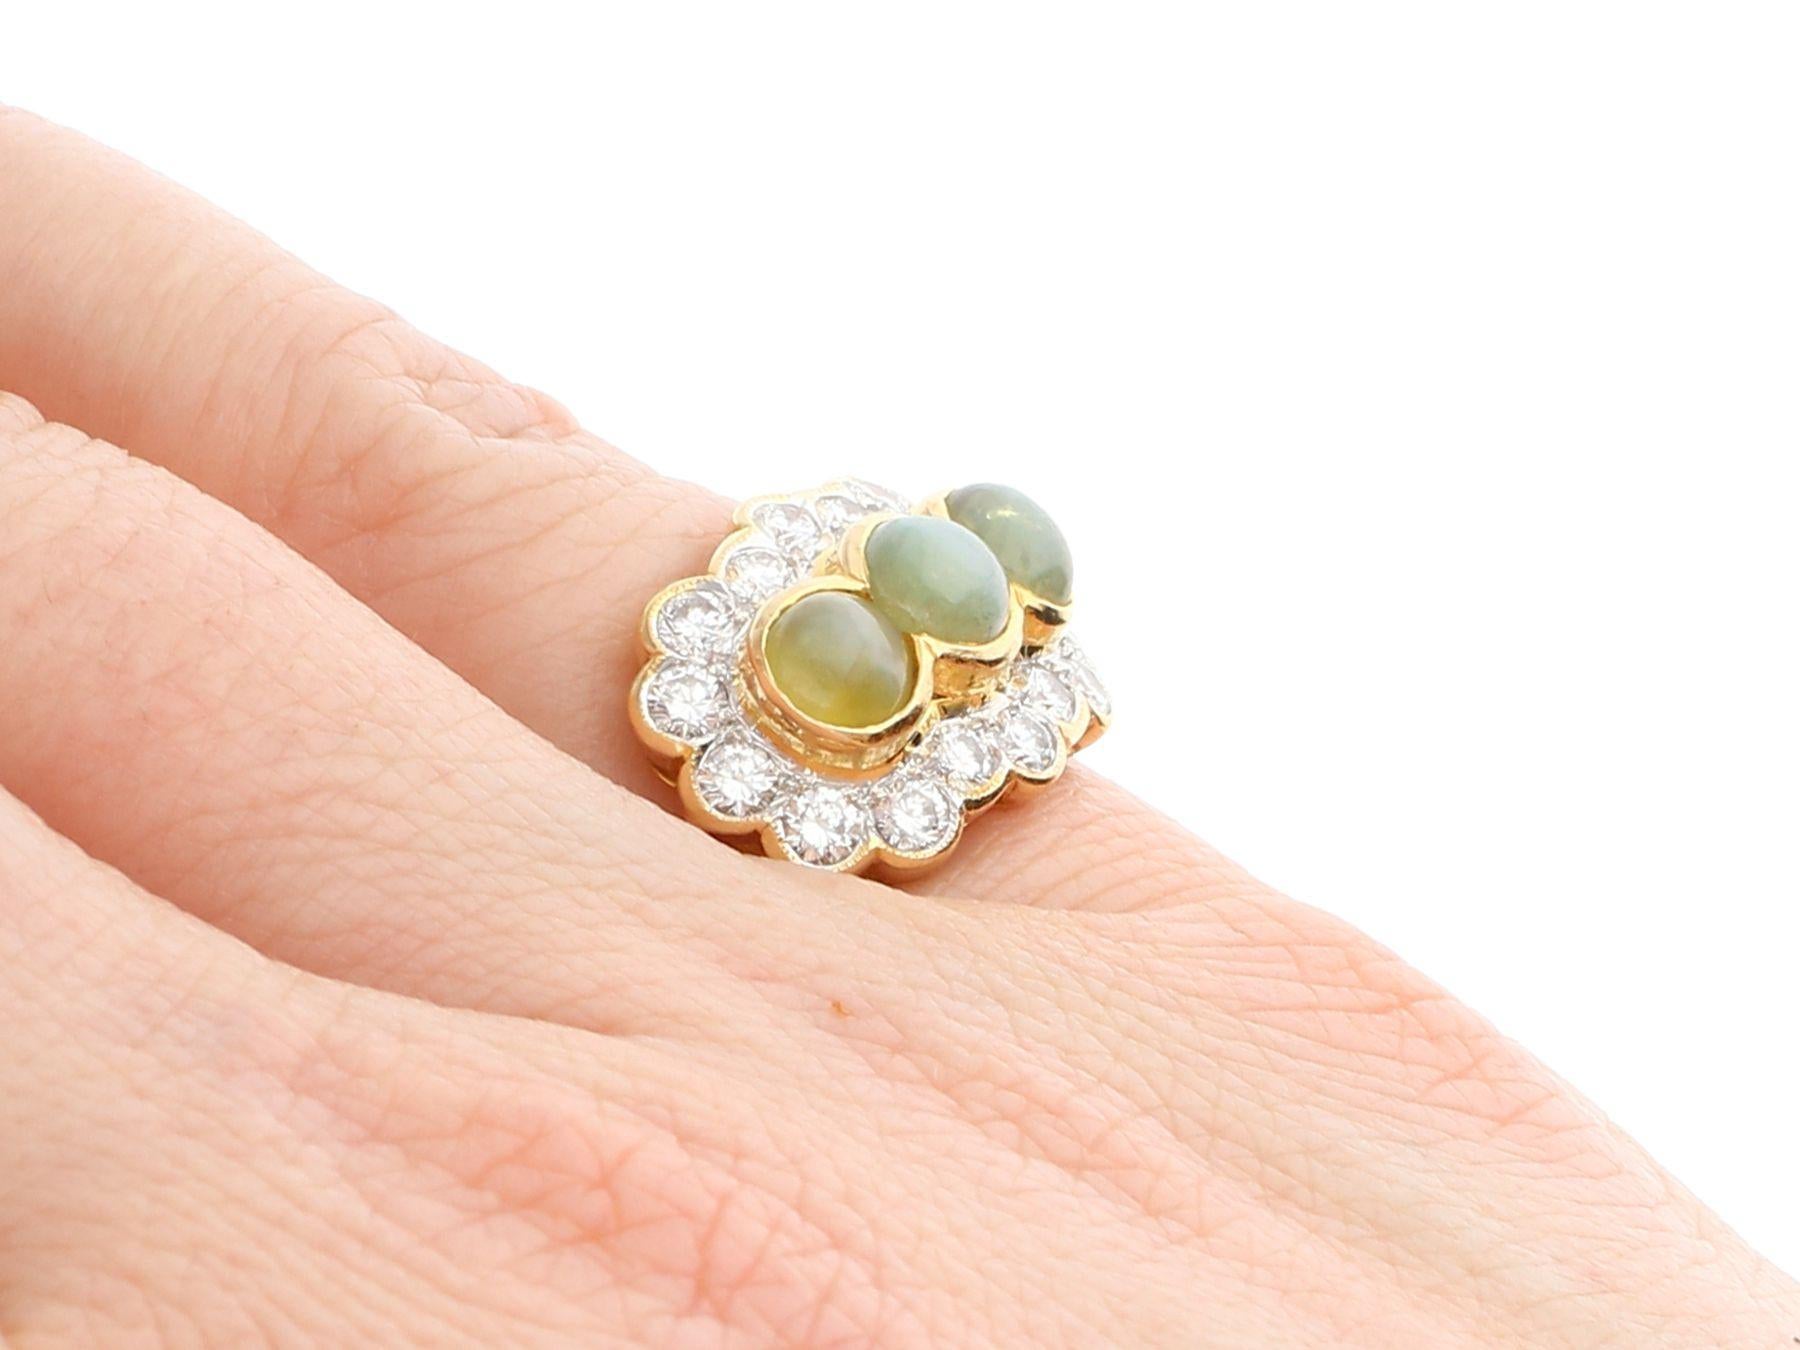 Vintage 1970s 2.19Ct Cabochon Cut Chrysoberyl and Diamond Gold Cocktail Ring For Sale 2